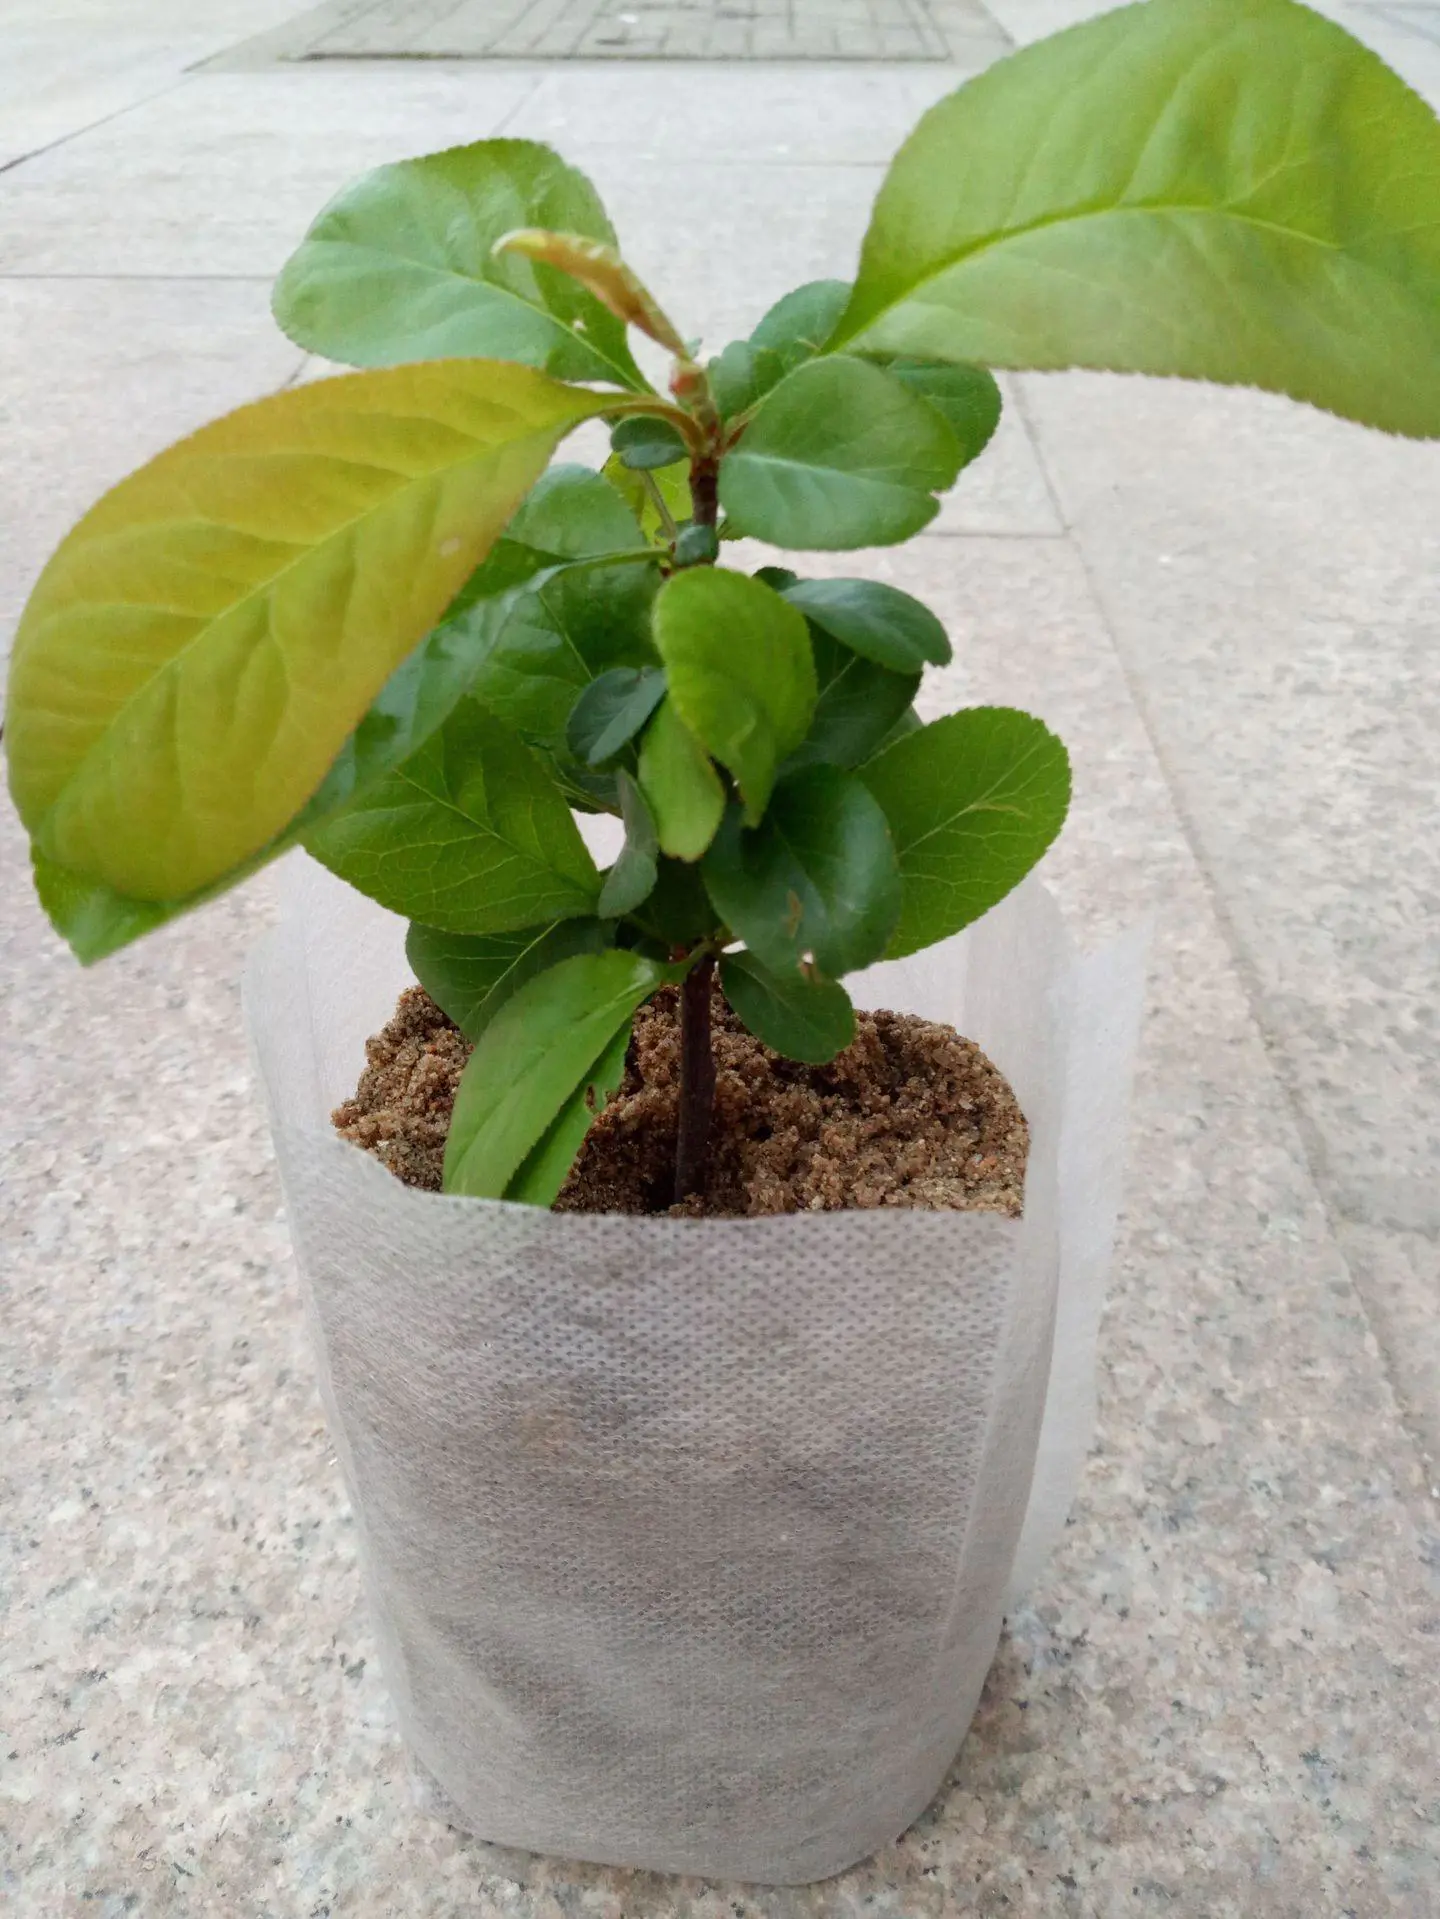 Seedling bag agricultural PP non-woven seedling bags for planting